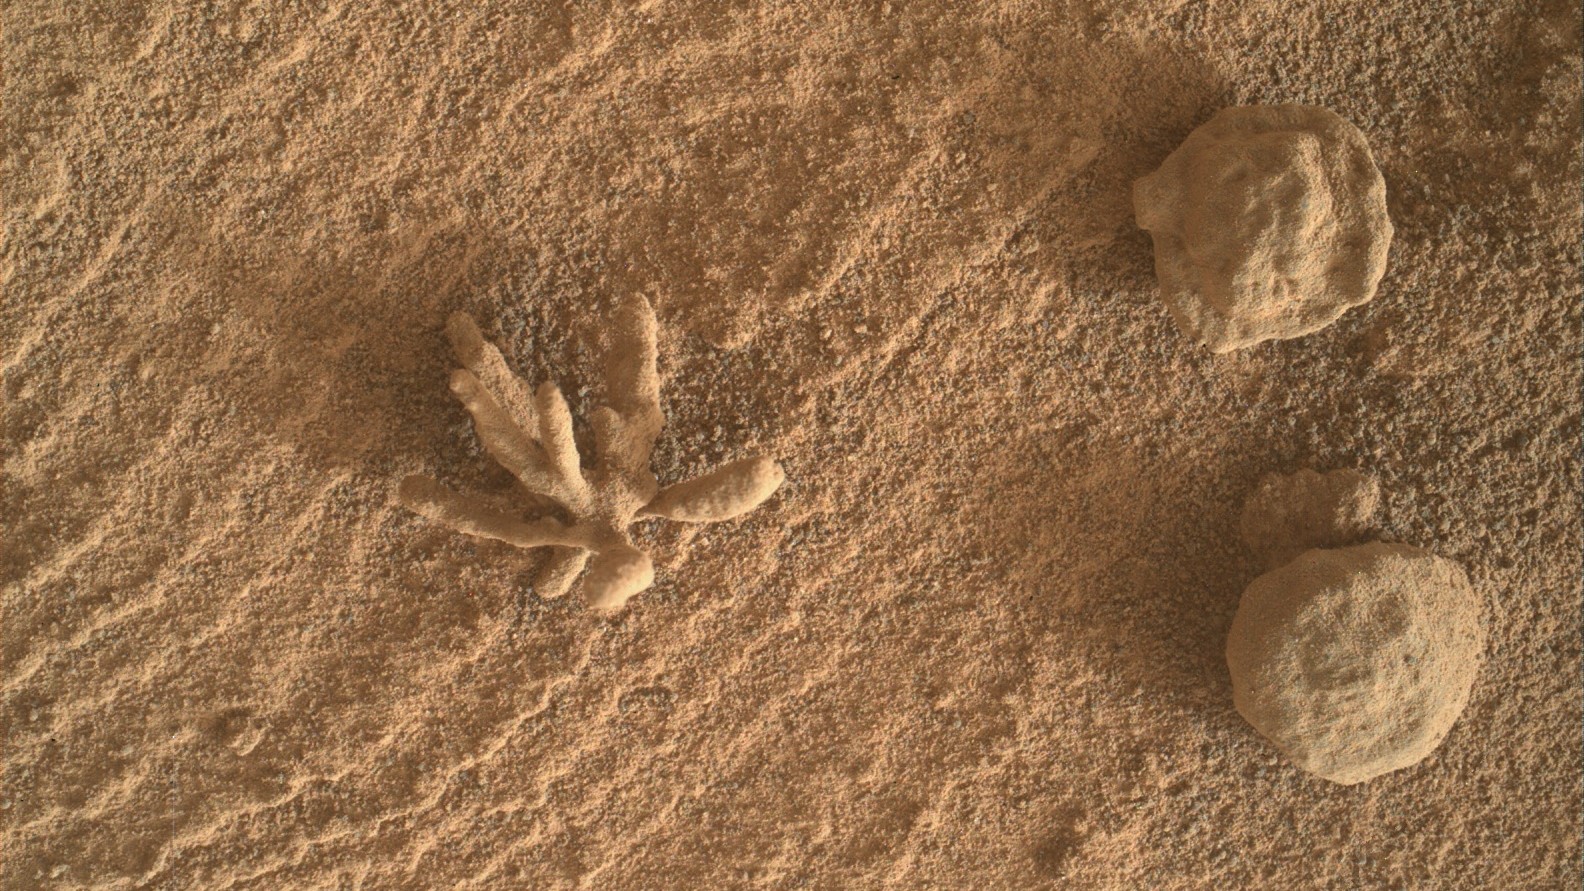 Curiosity rover snaps close-up of tiny 'mineral flower' on Mars thumbnail